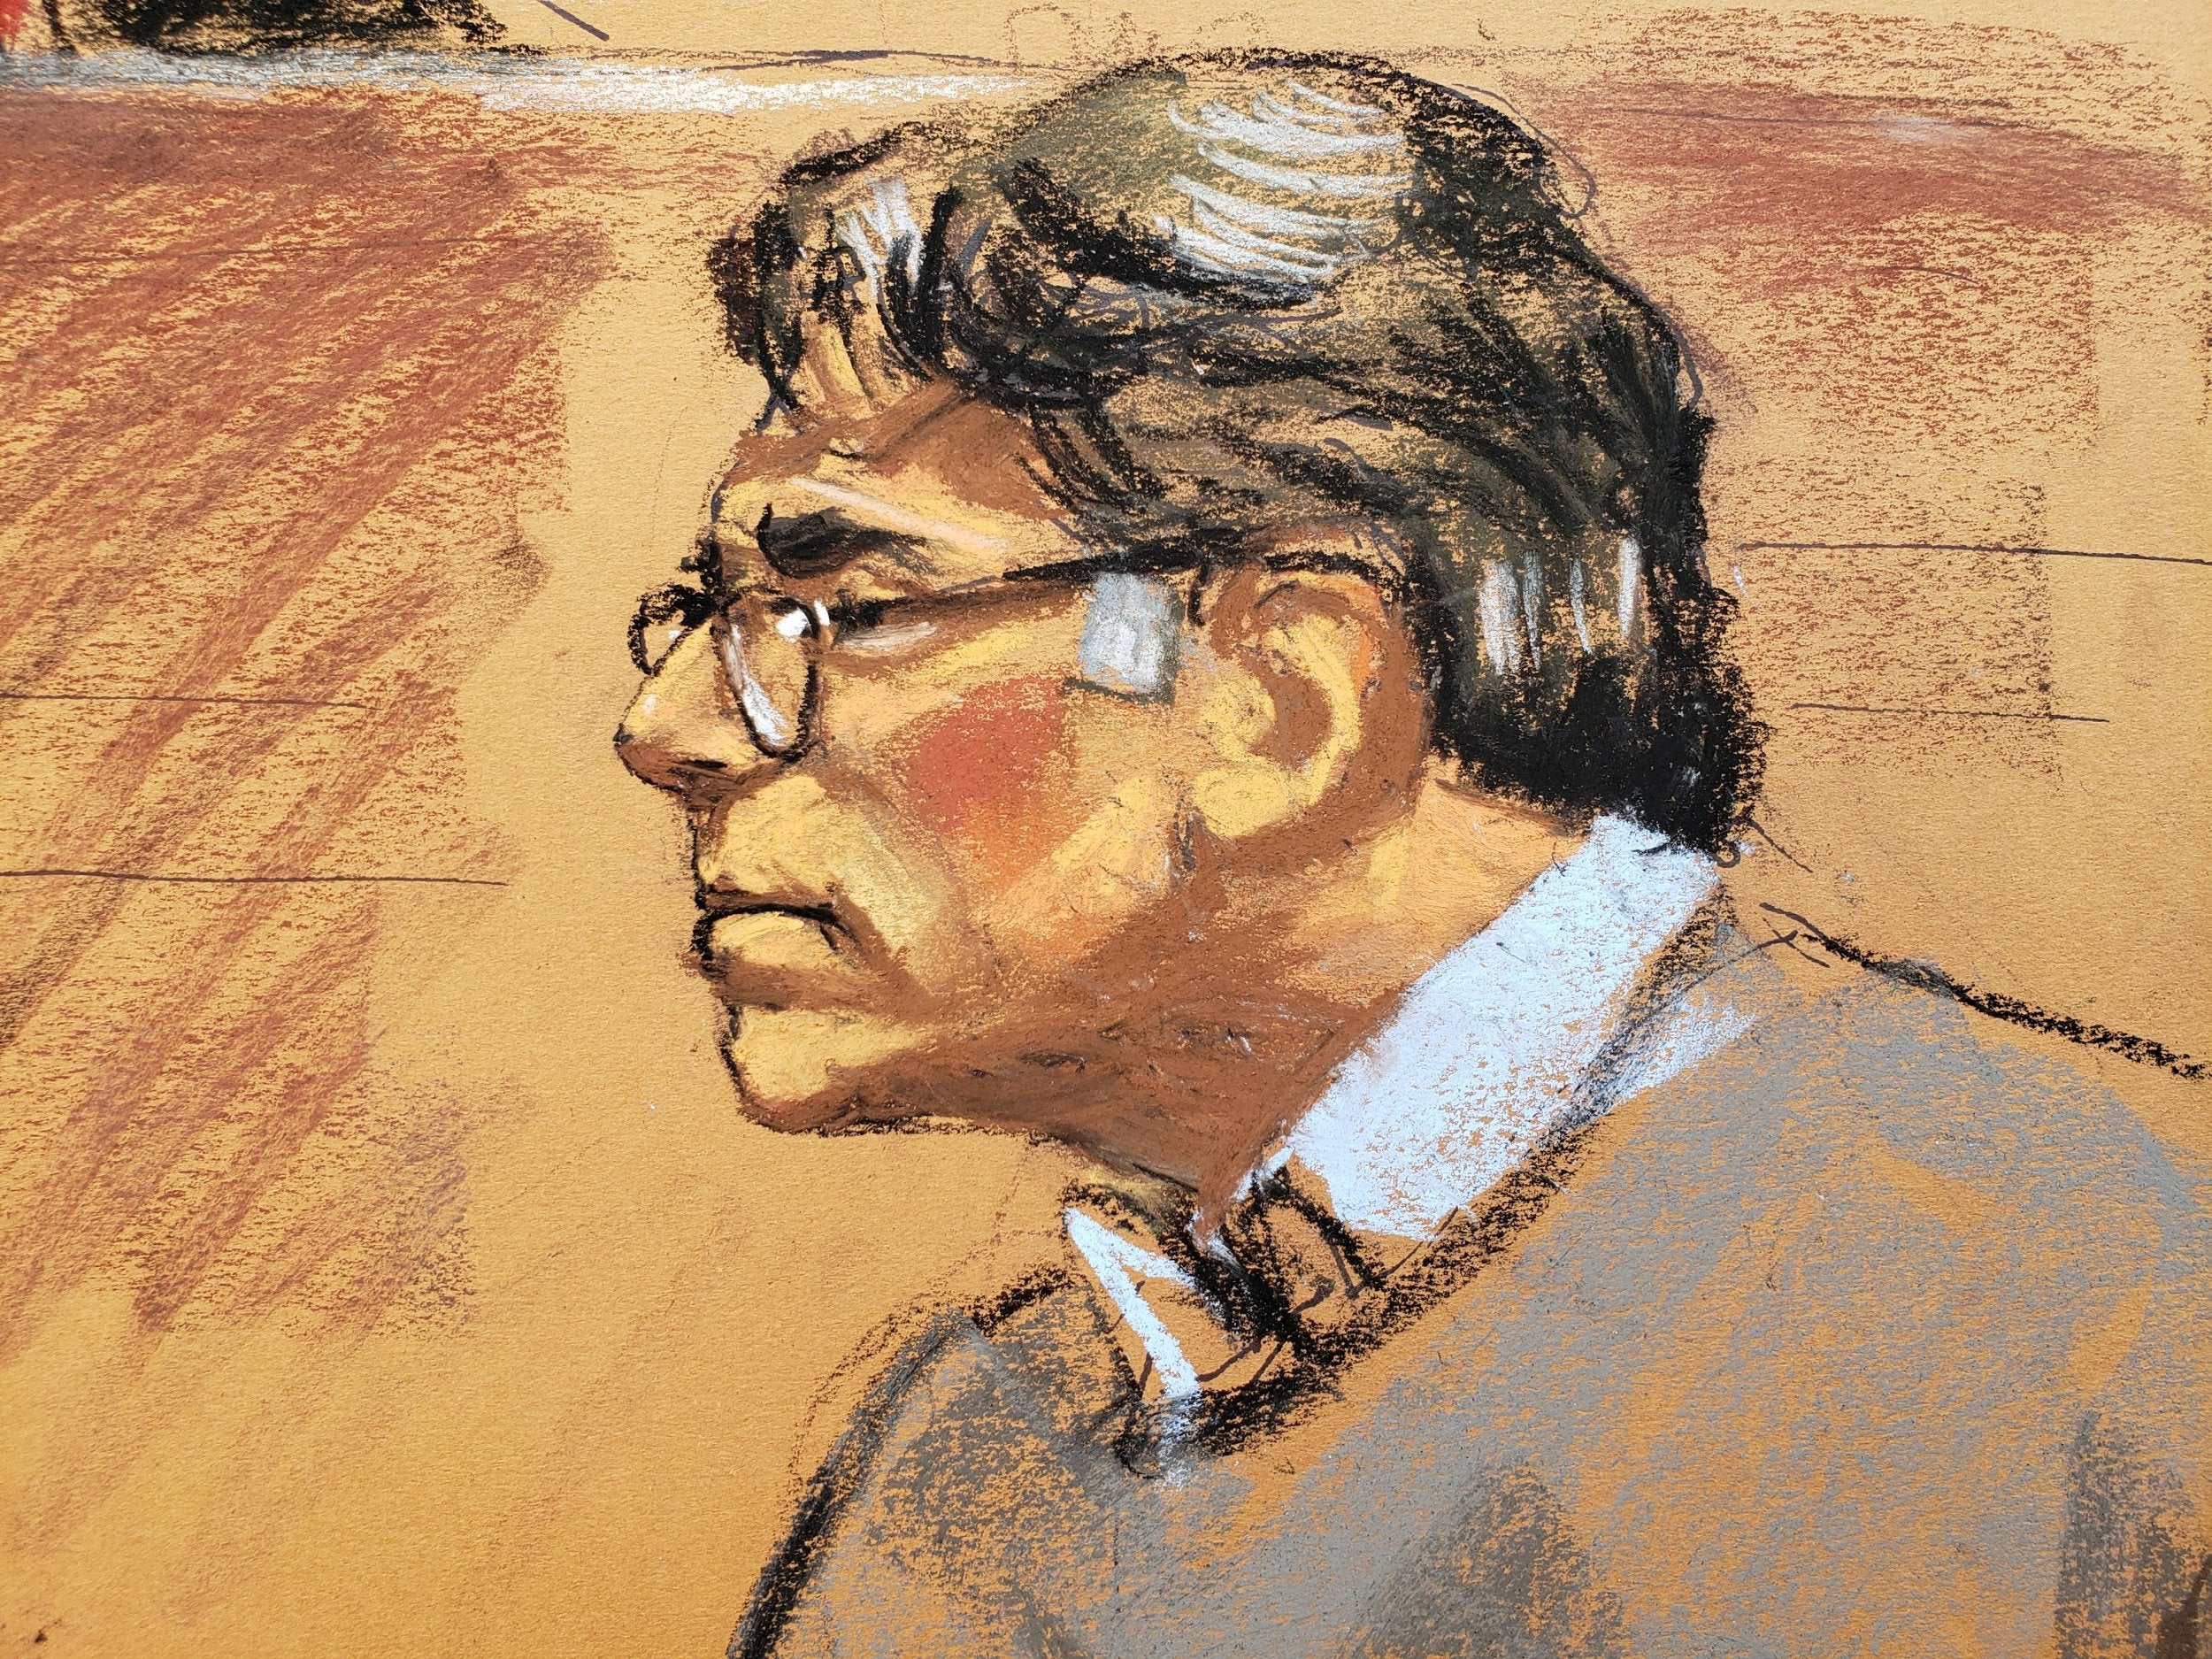 A courtroom sketch of Keith Raniere at the Brooklyn federal courthouse (Reuters)